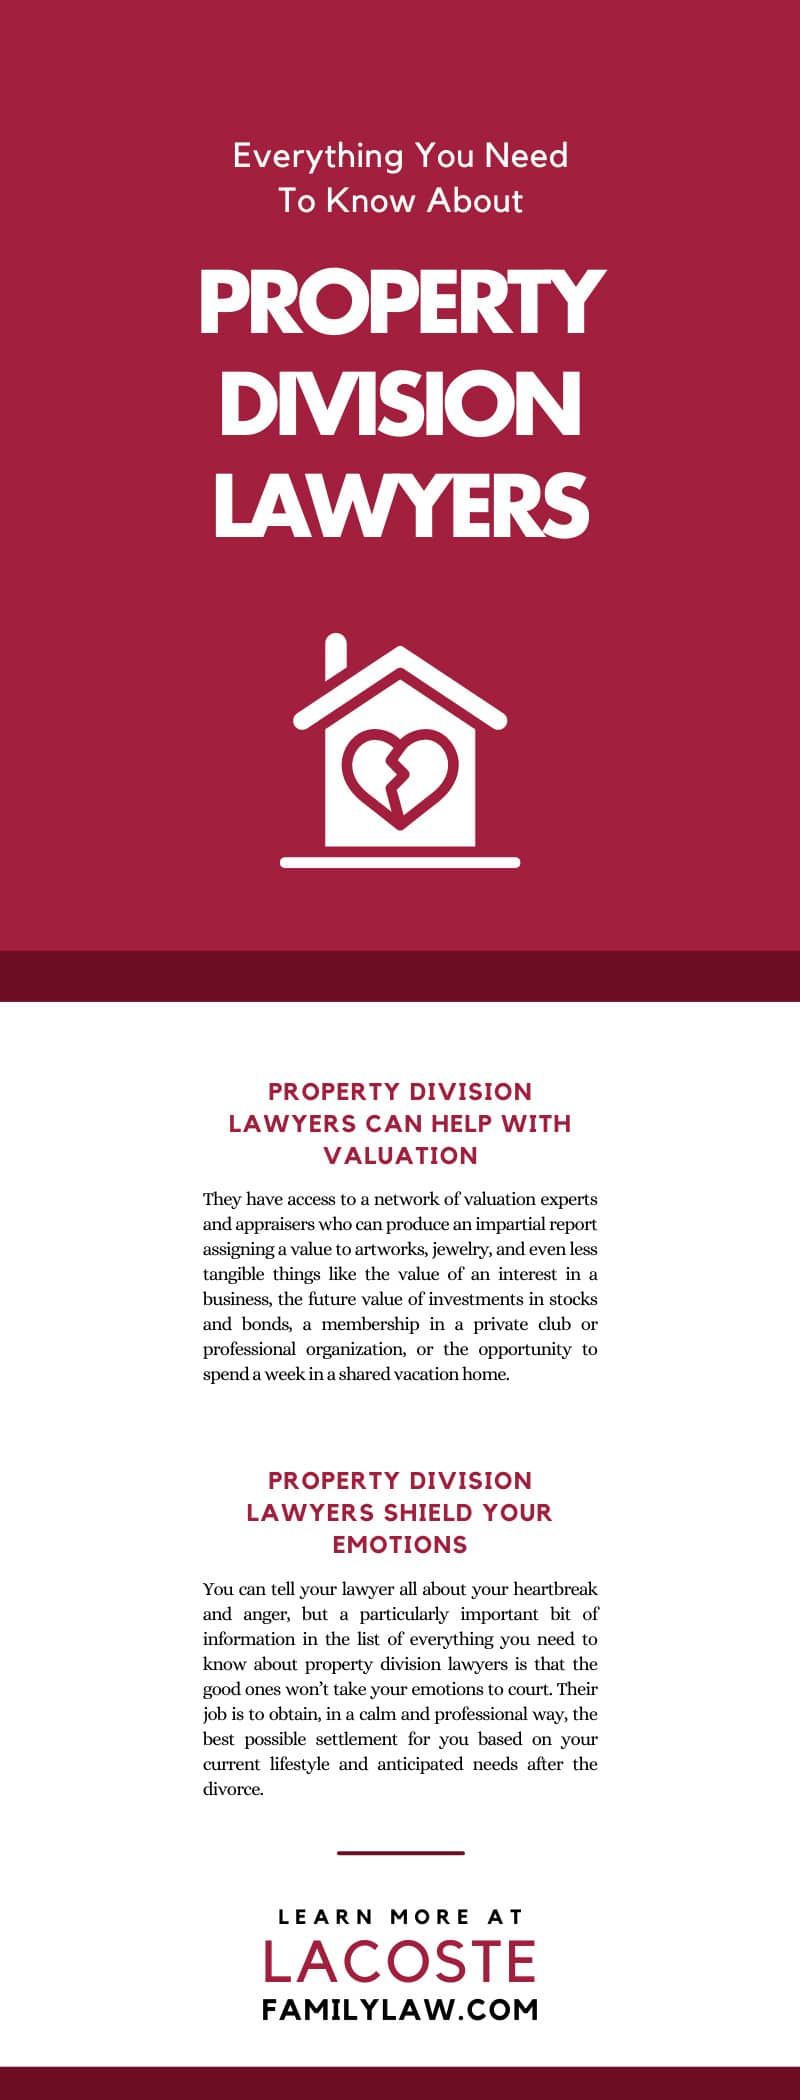 Everything You Need To Know About Property Division Lawyers